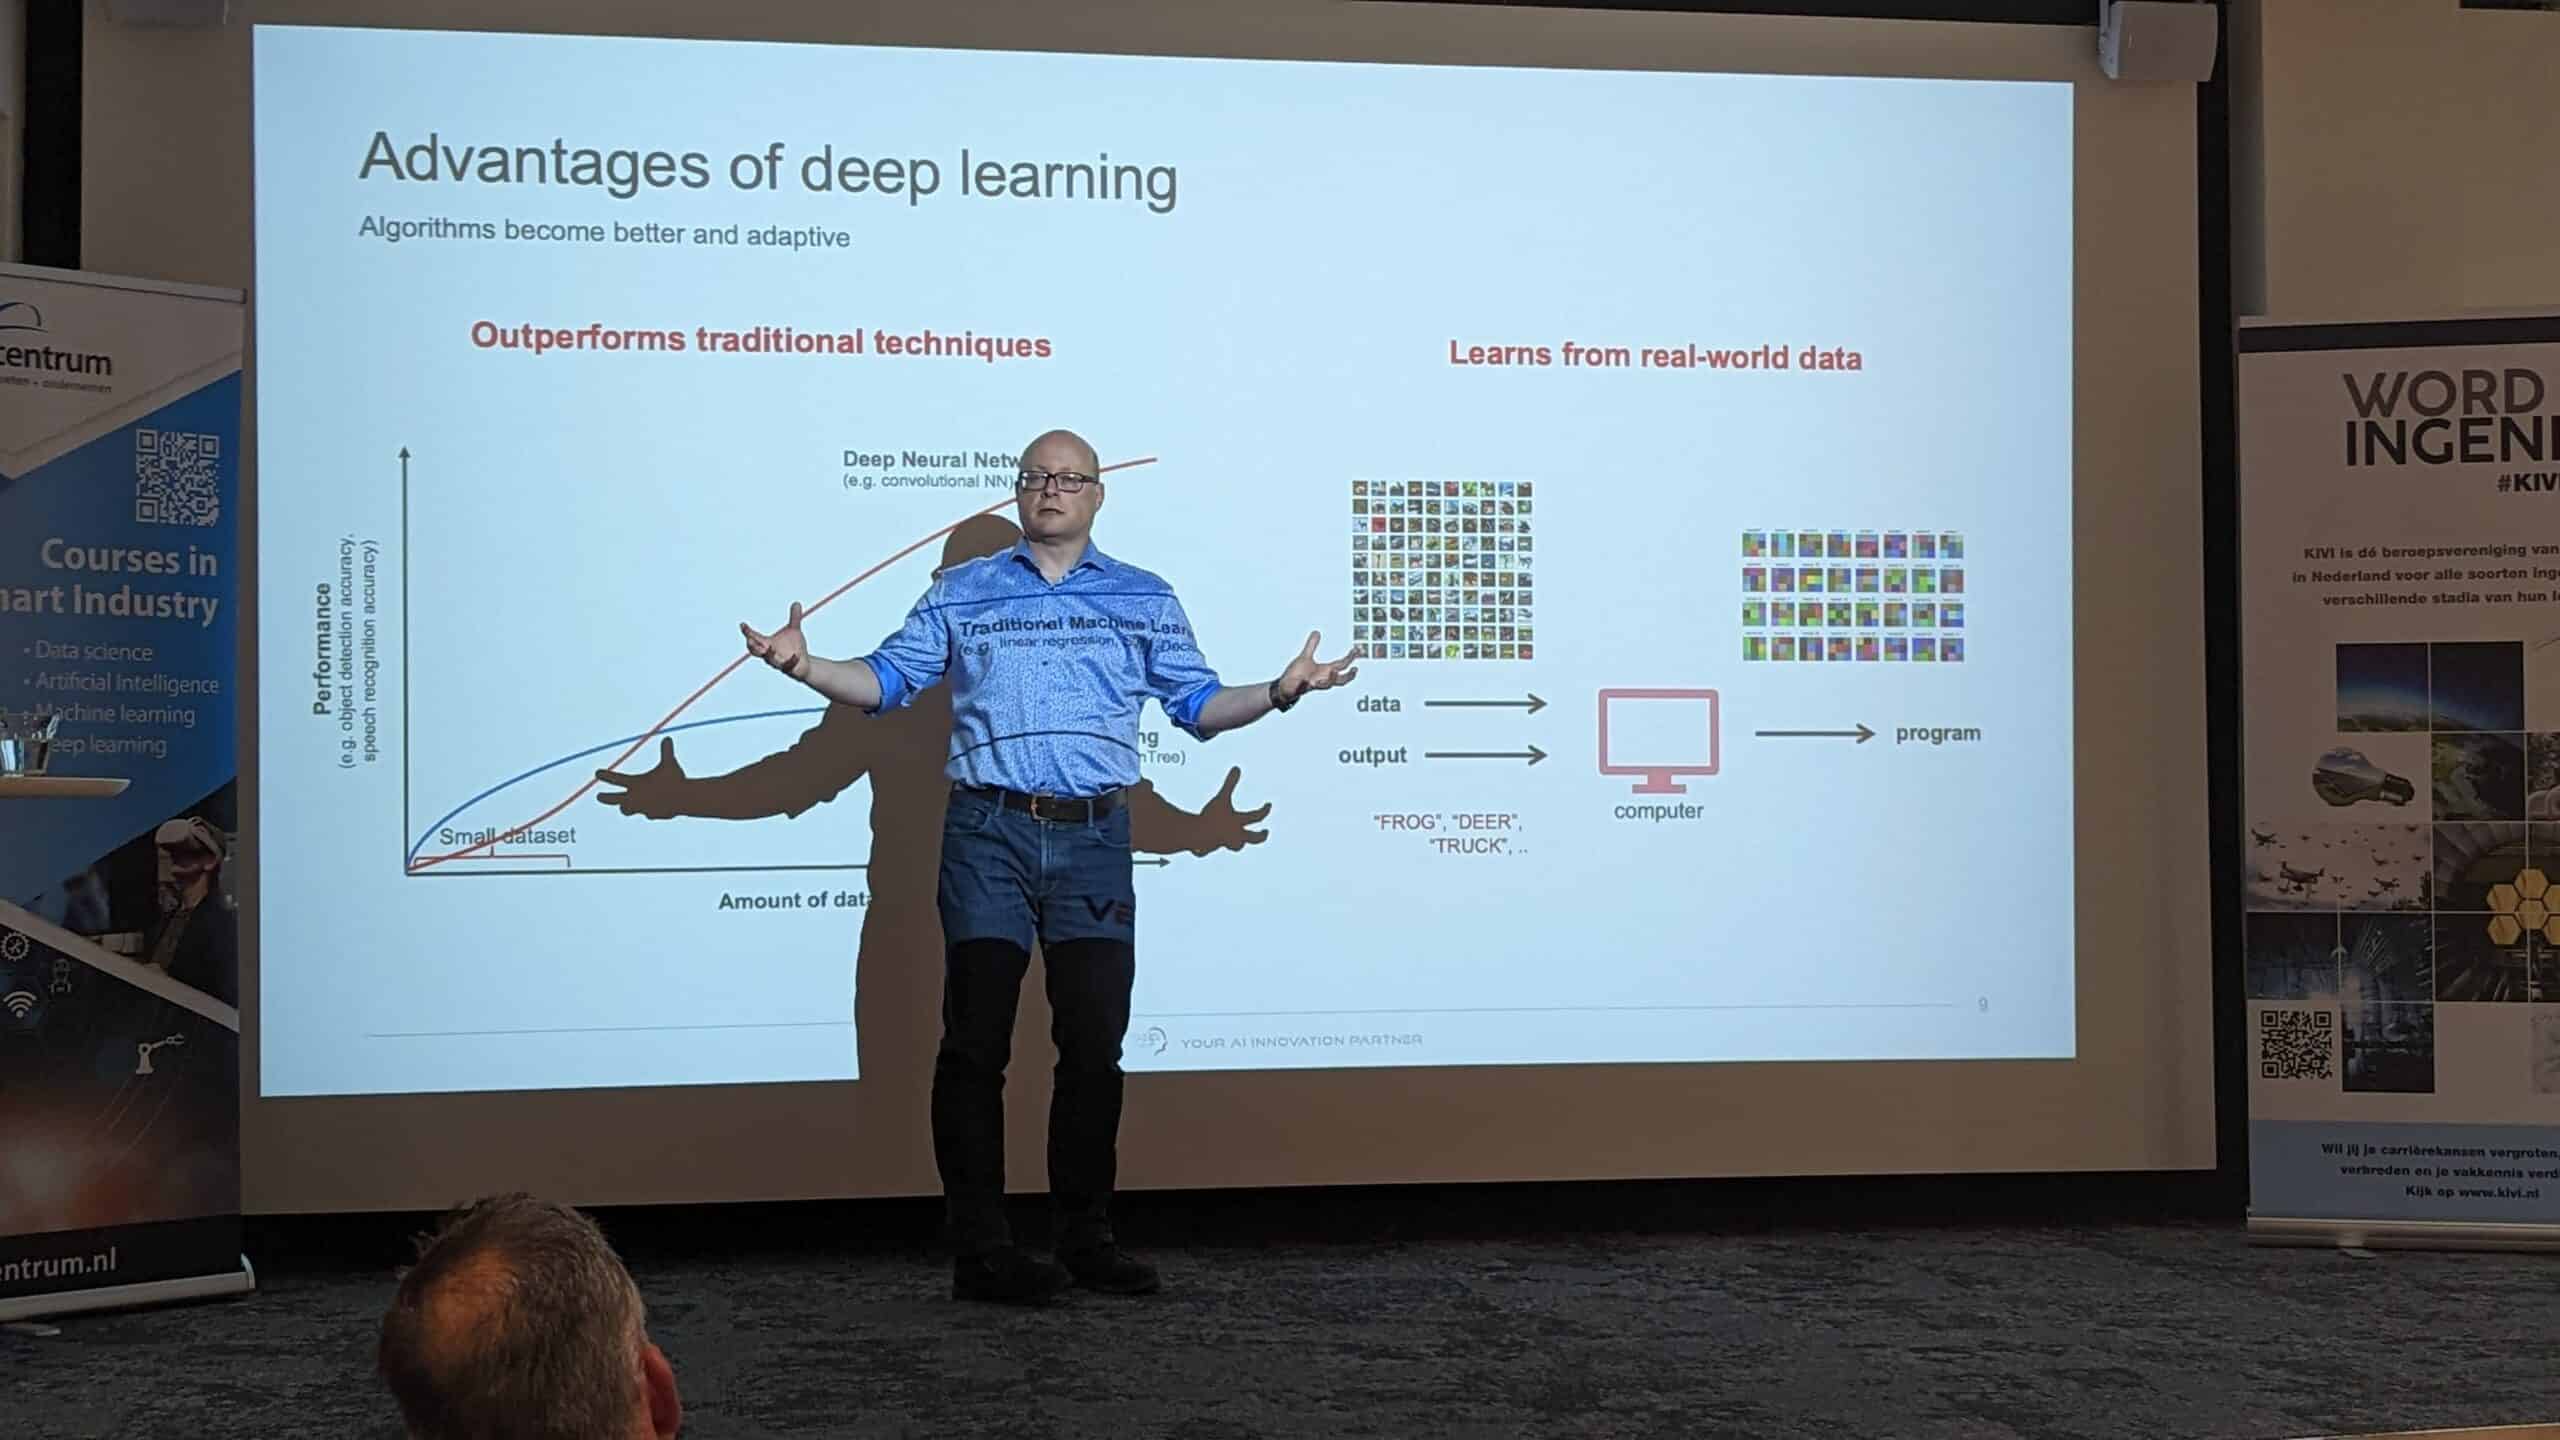 The more data, the more deep learning capacity